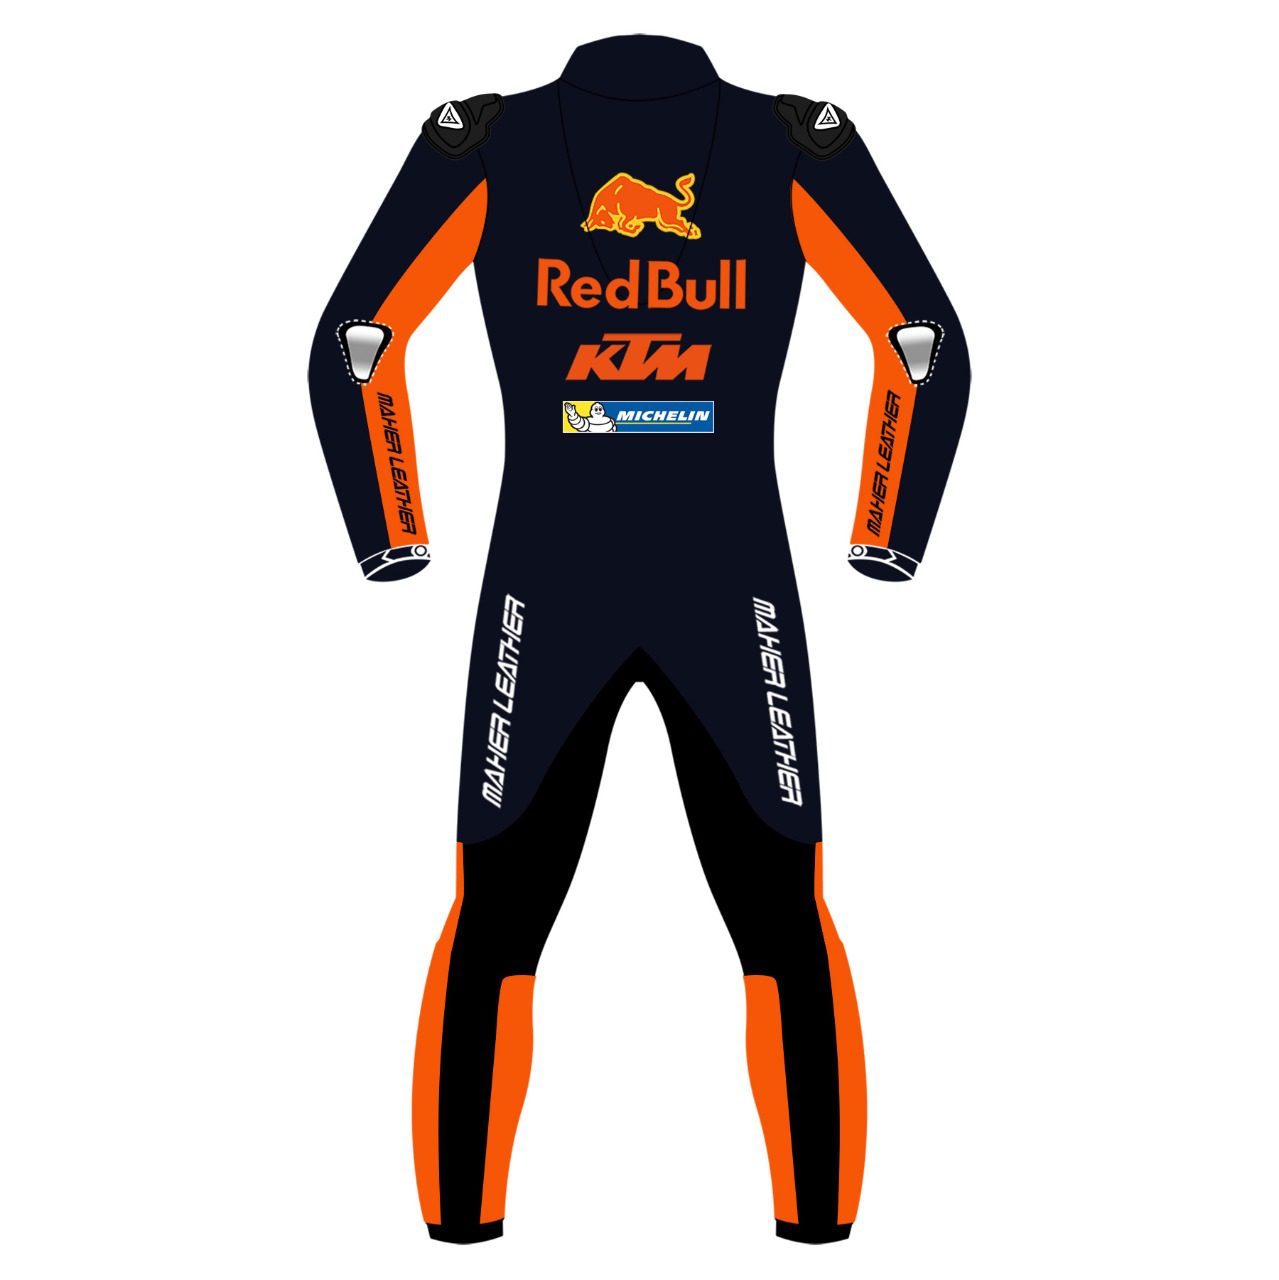 Youth Ktm Motogp Leather Racing Suit Red Bull Motorcycle Suit